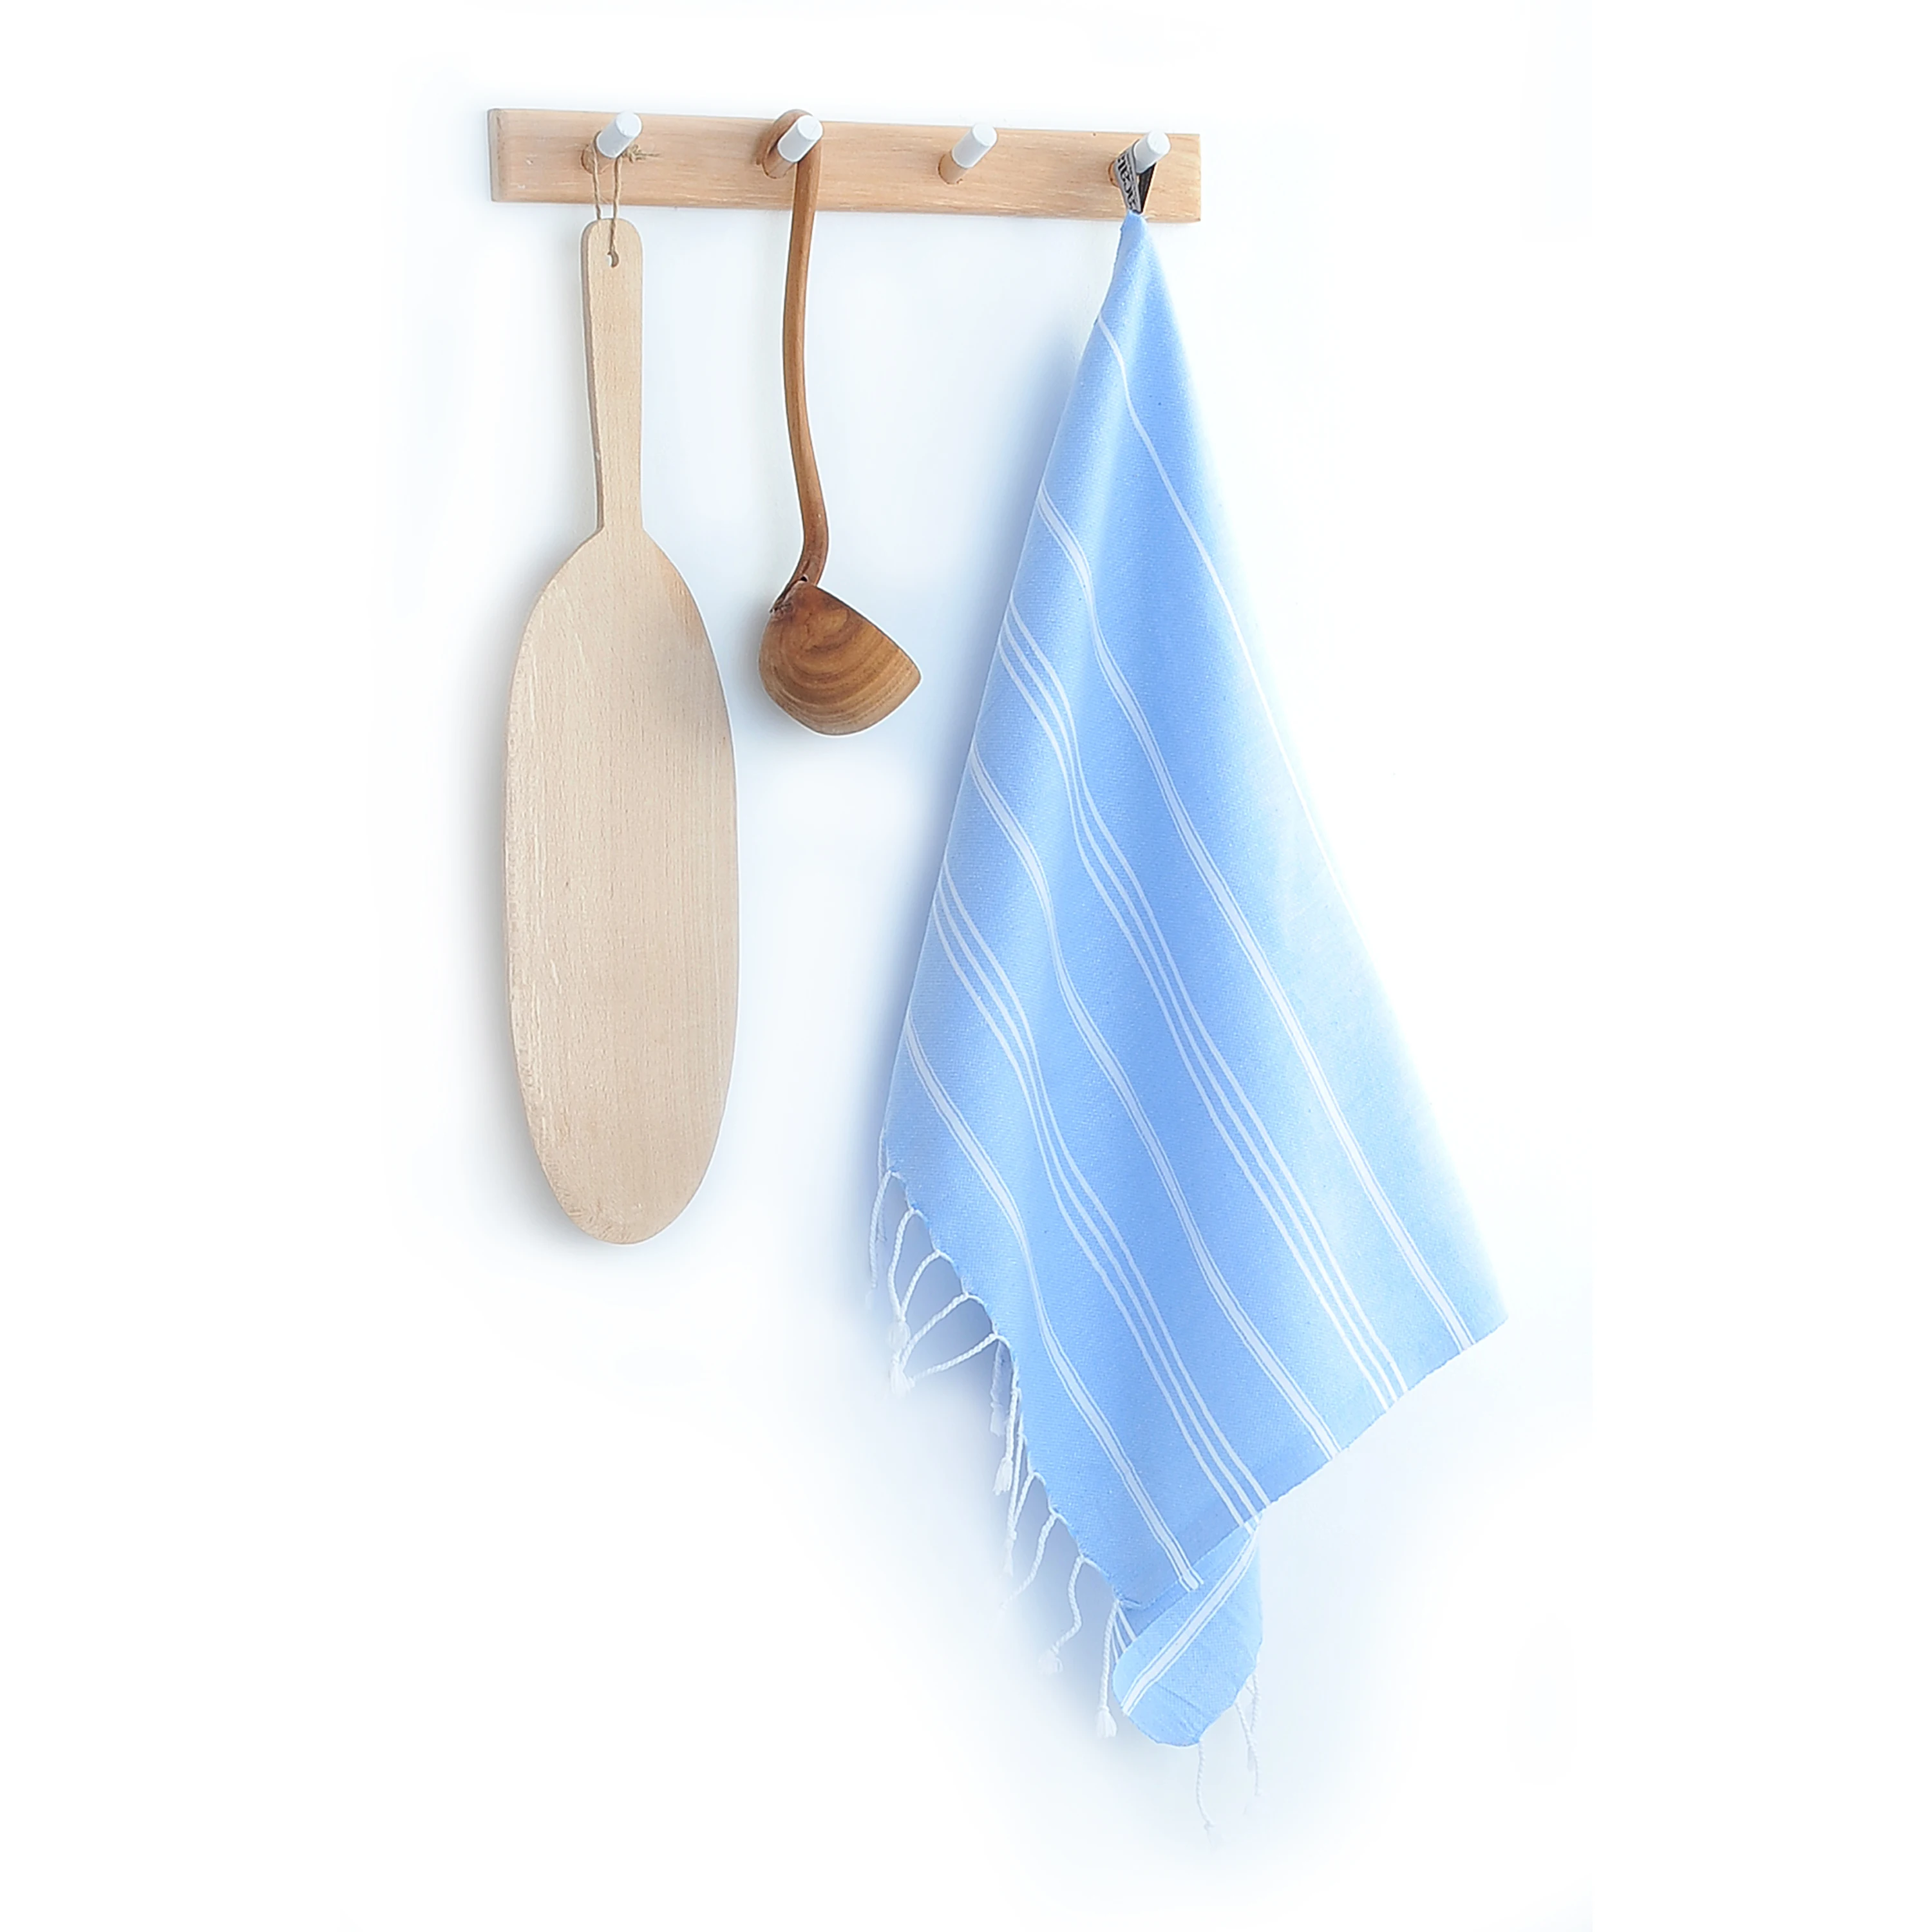 

CACALA Turkish Hand and Face Peskir Towels with Hanging Loop-Kitchen Bath Head Gym-%100 Cotton Softly 60x90Cm(23"x35") 110 Gr